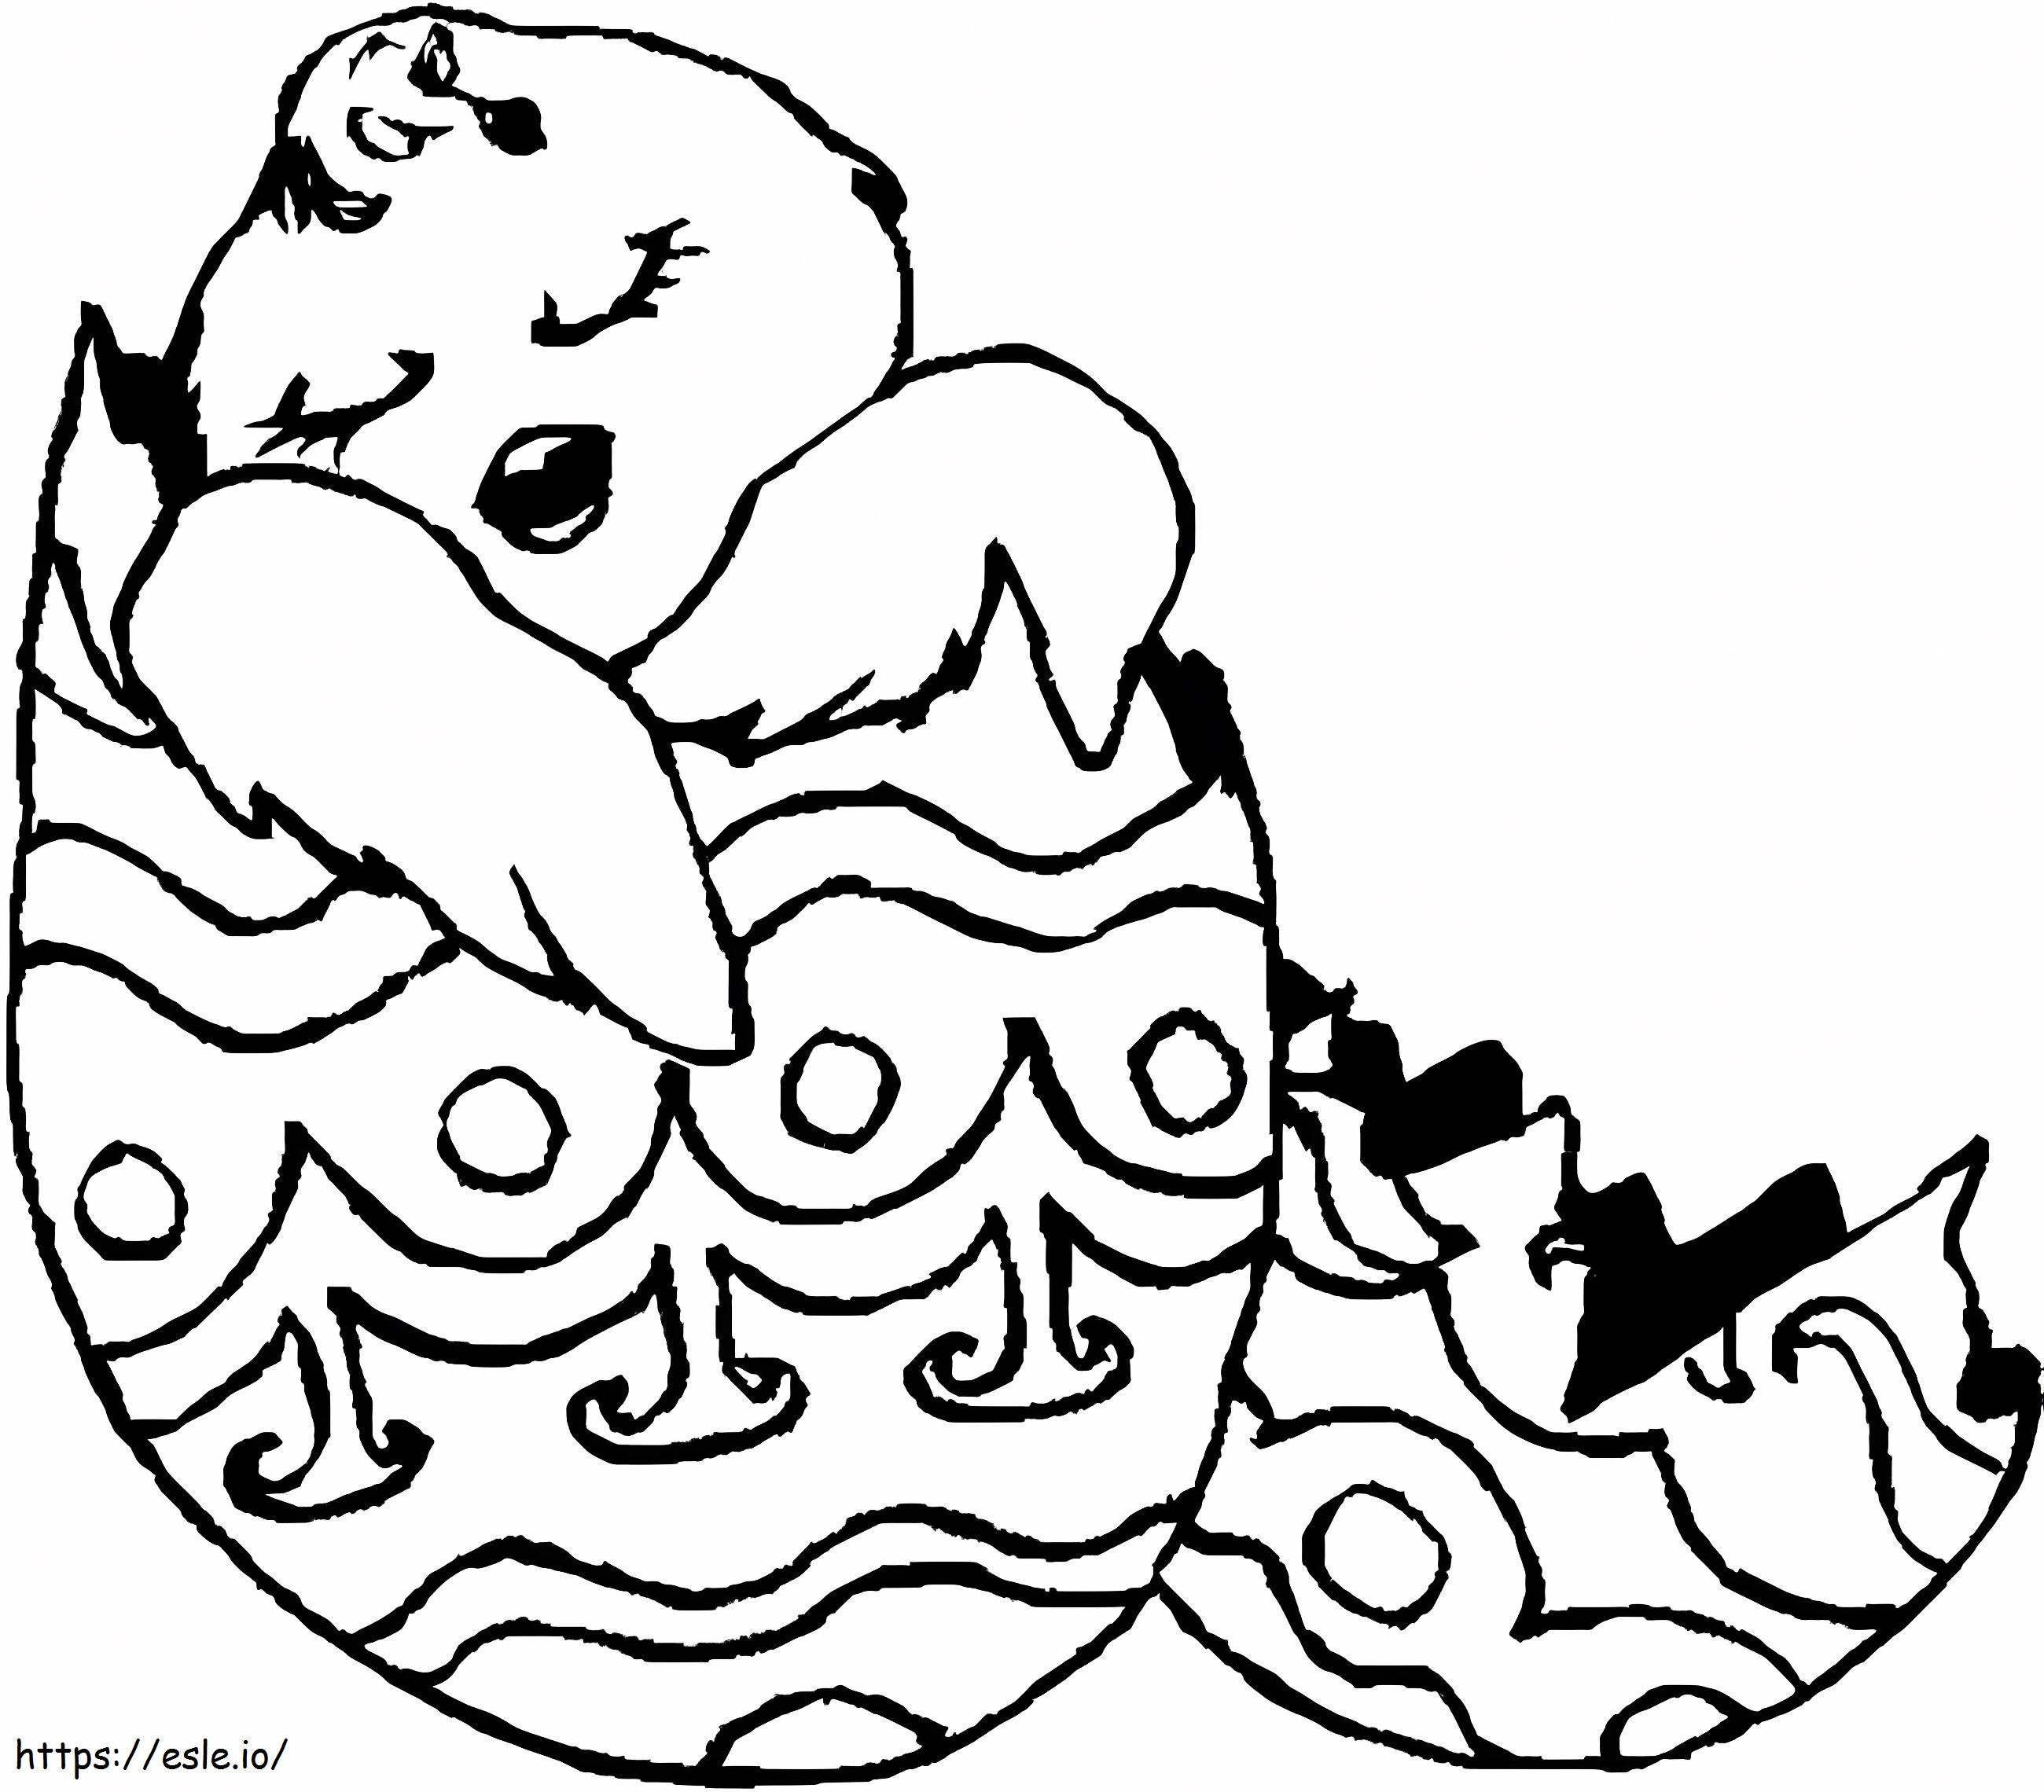 Easter Chick Sleeping coloring page